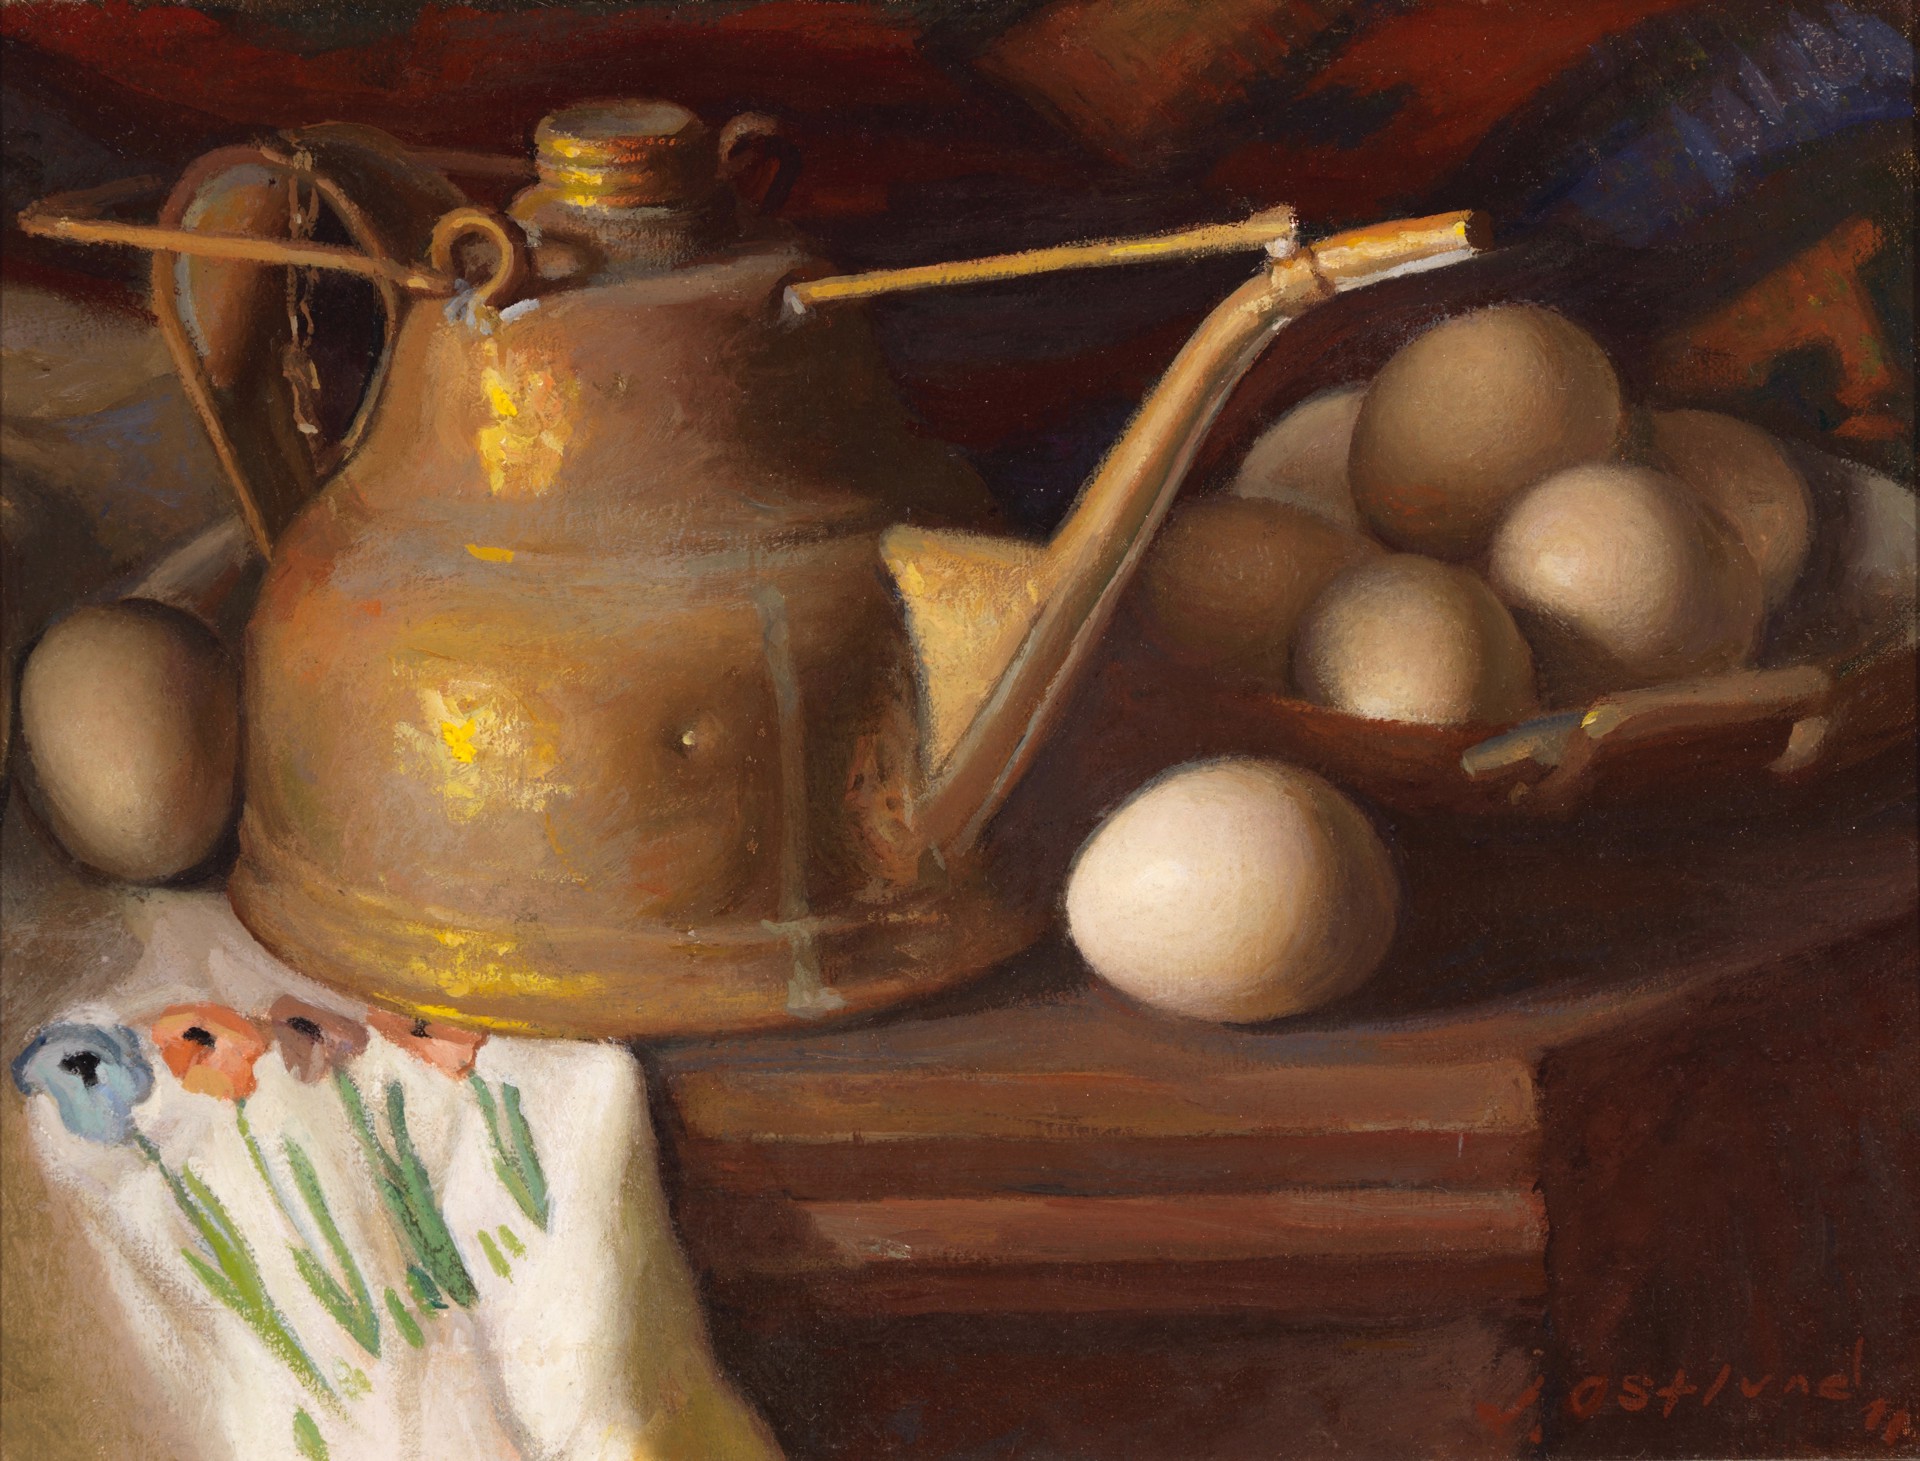 Copper Pot and Eggs by Jim Ostlund